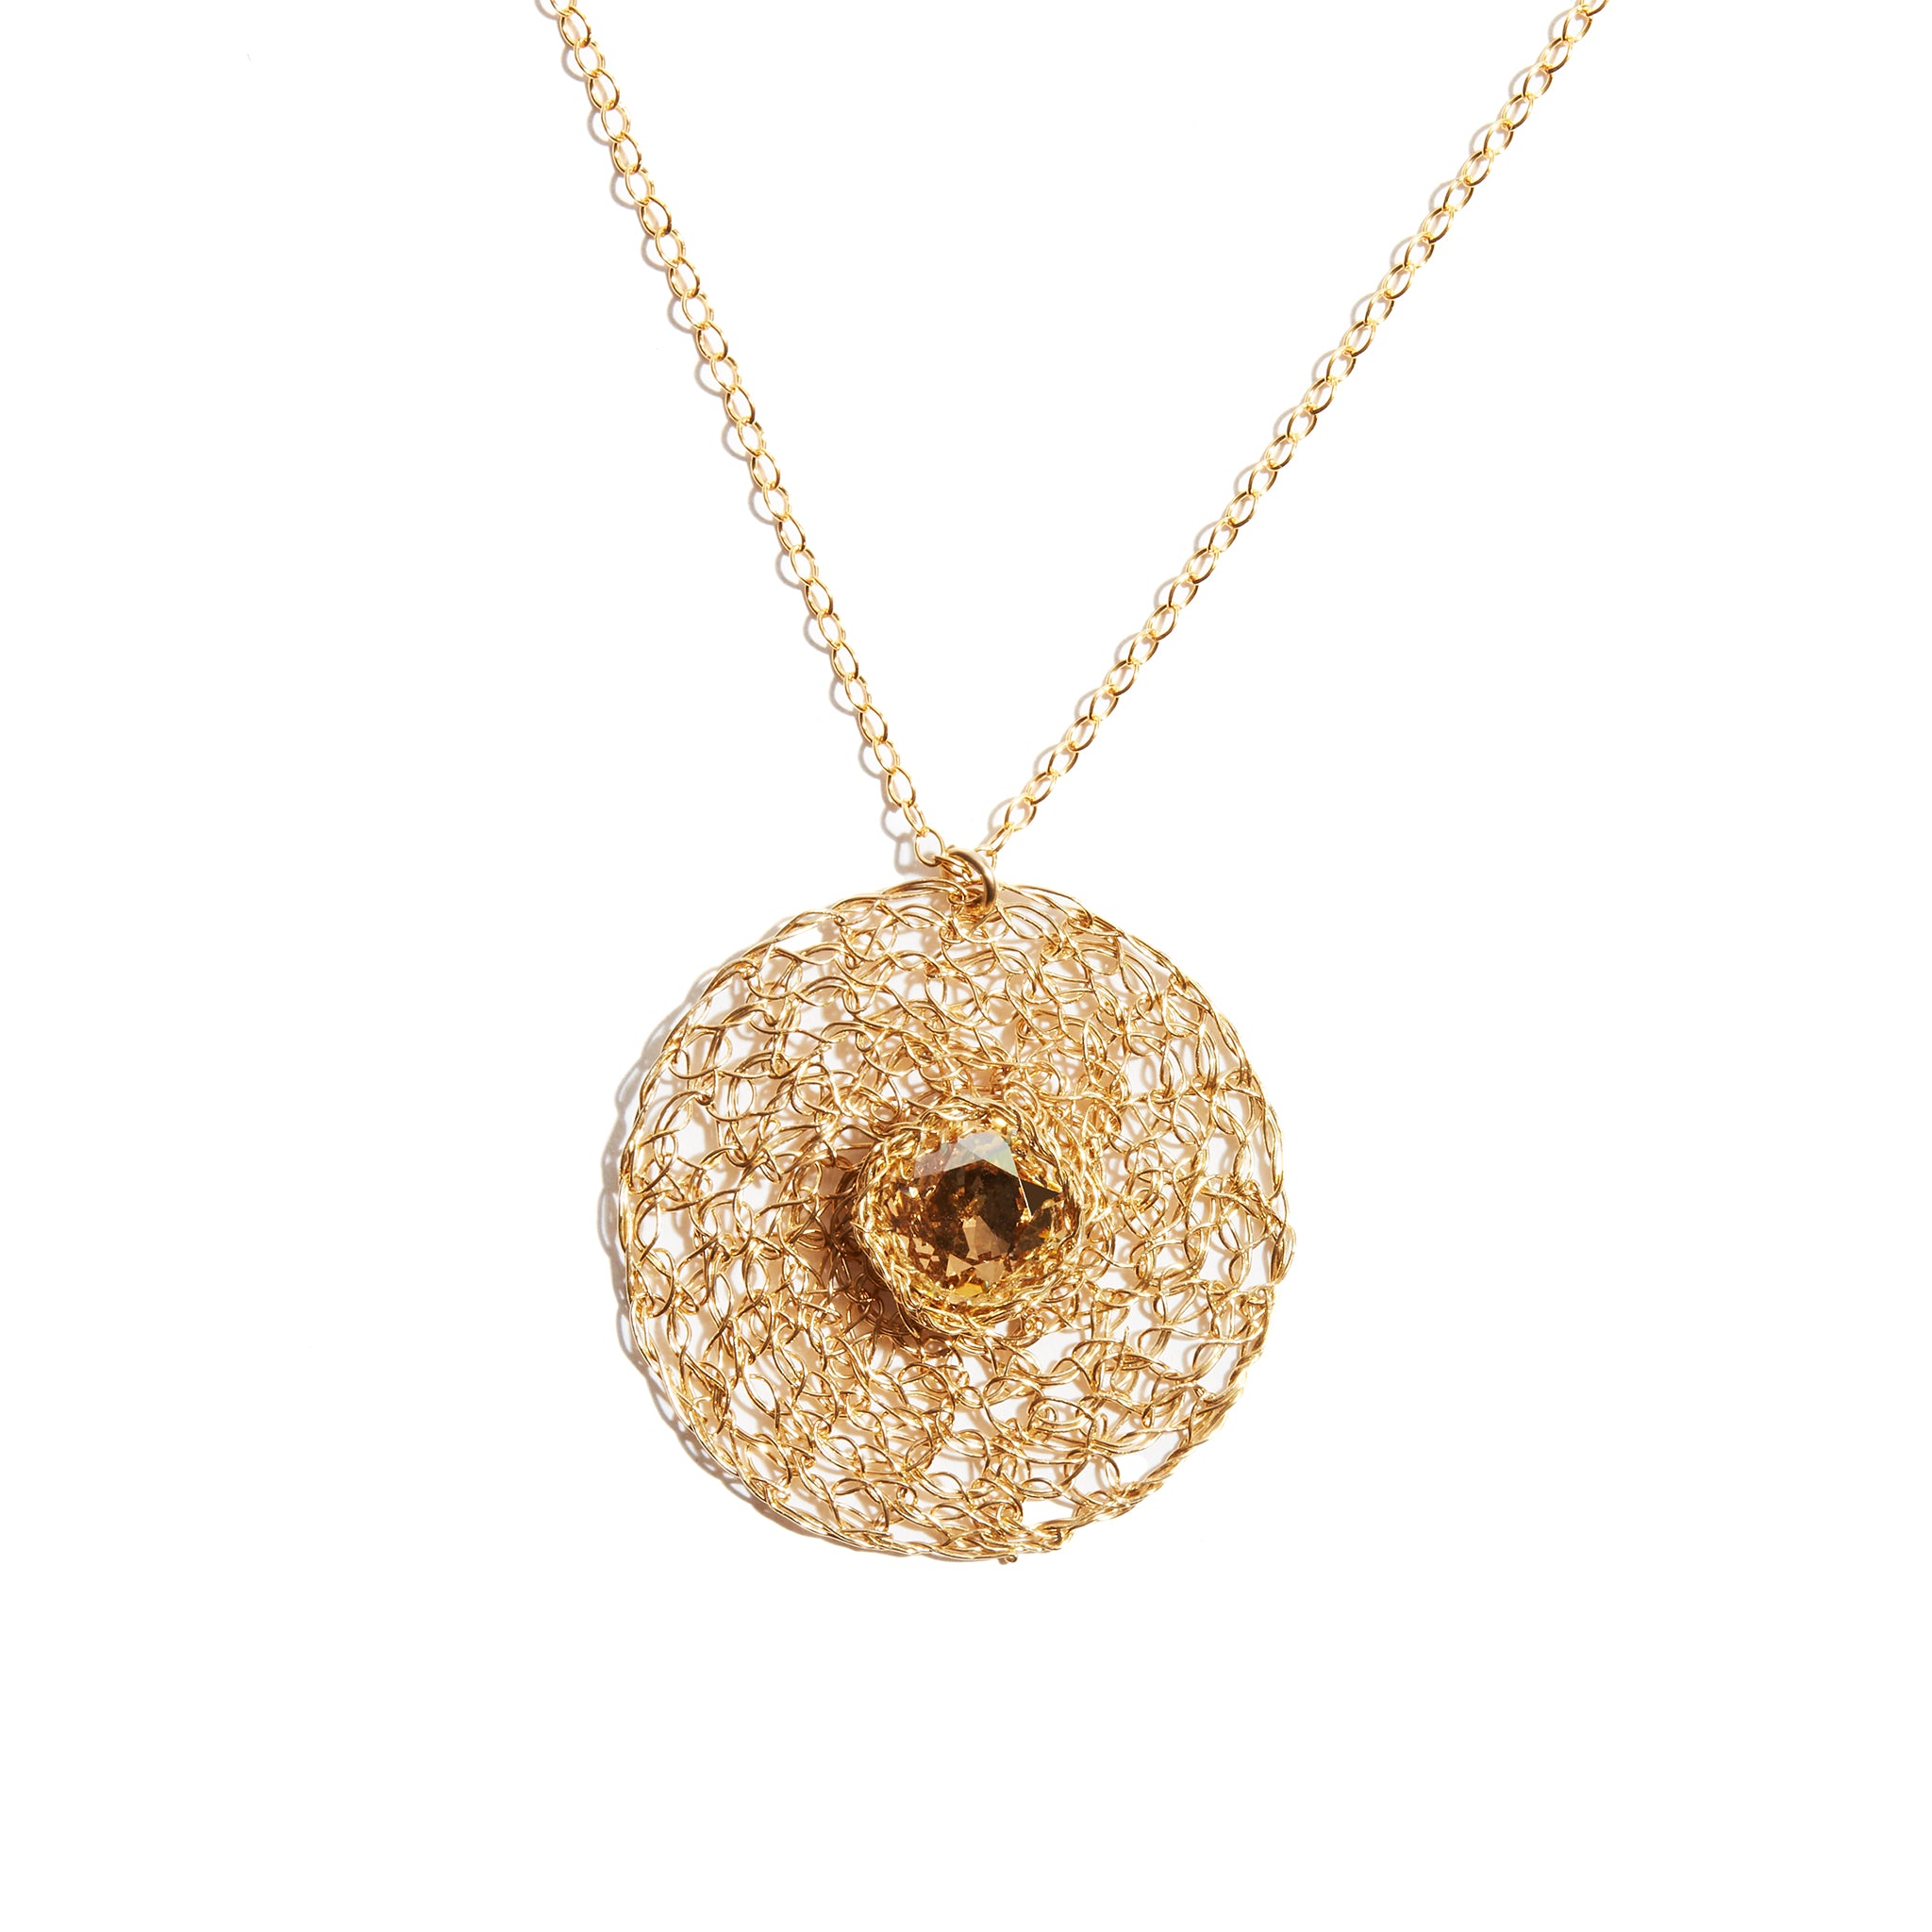 A piece that tells a story. Made from 14ct gold fill, this champagne stoned crochet pendant is the perfect gift for someone special.